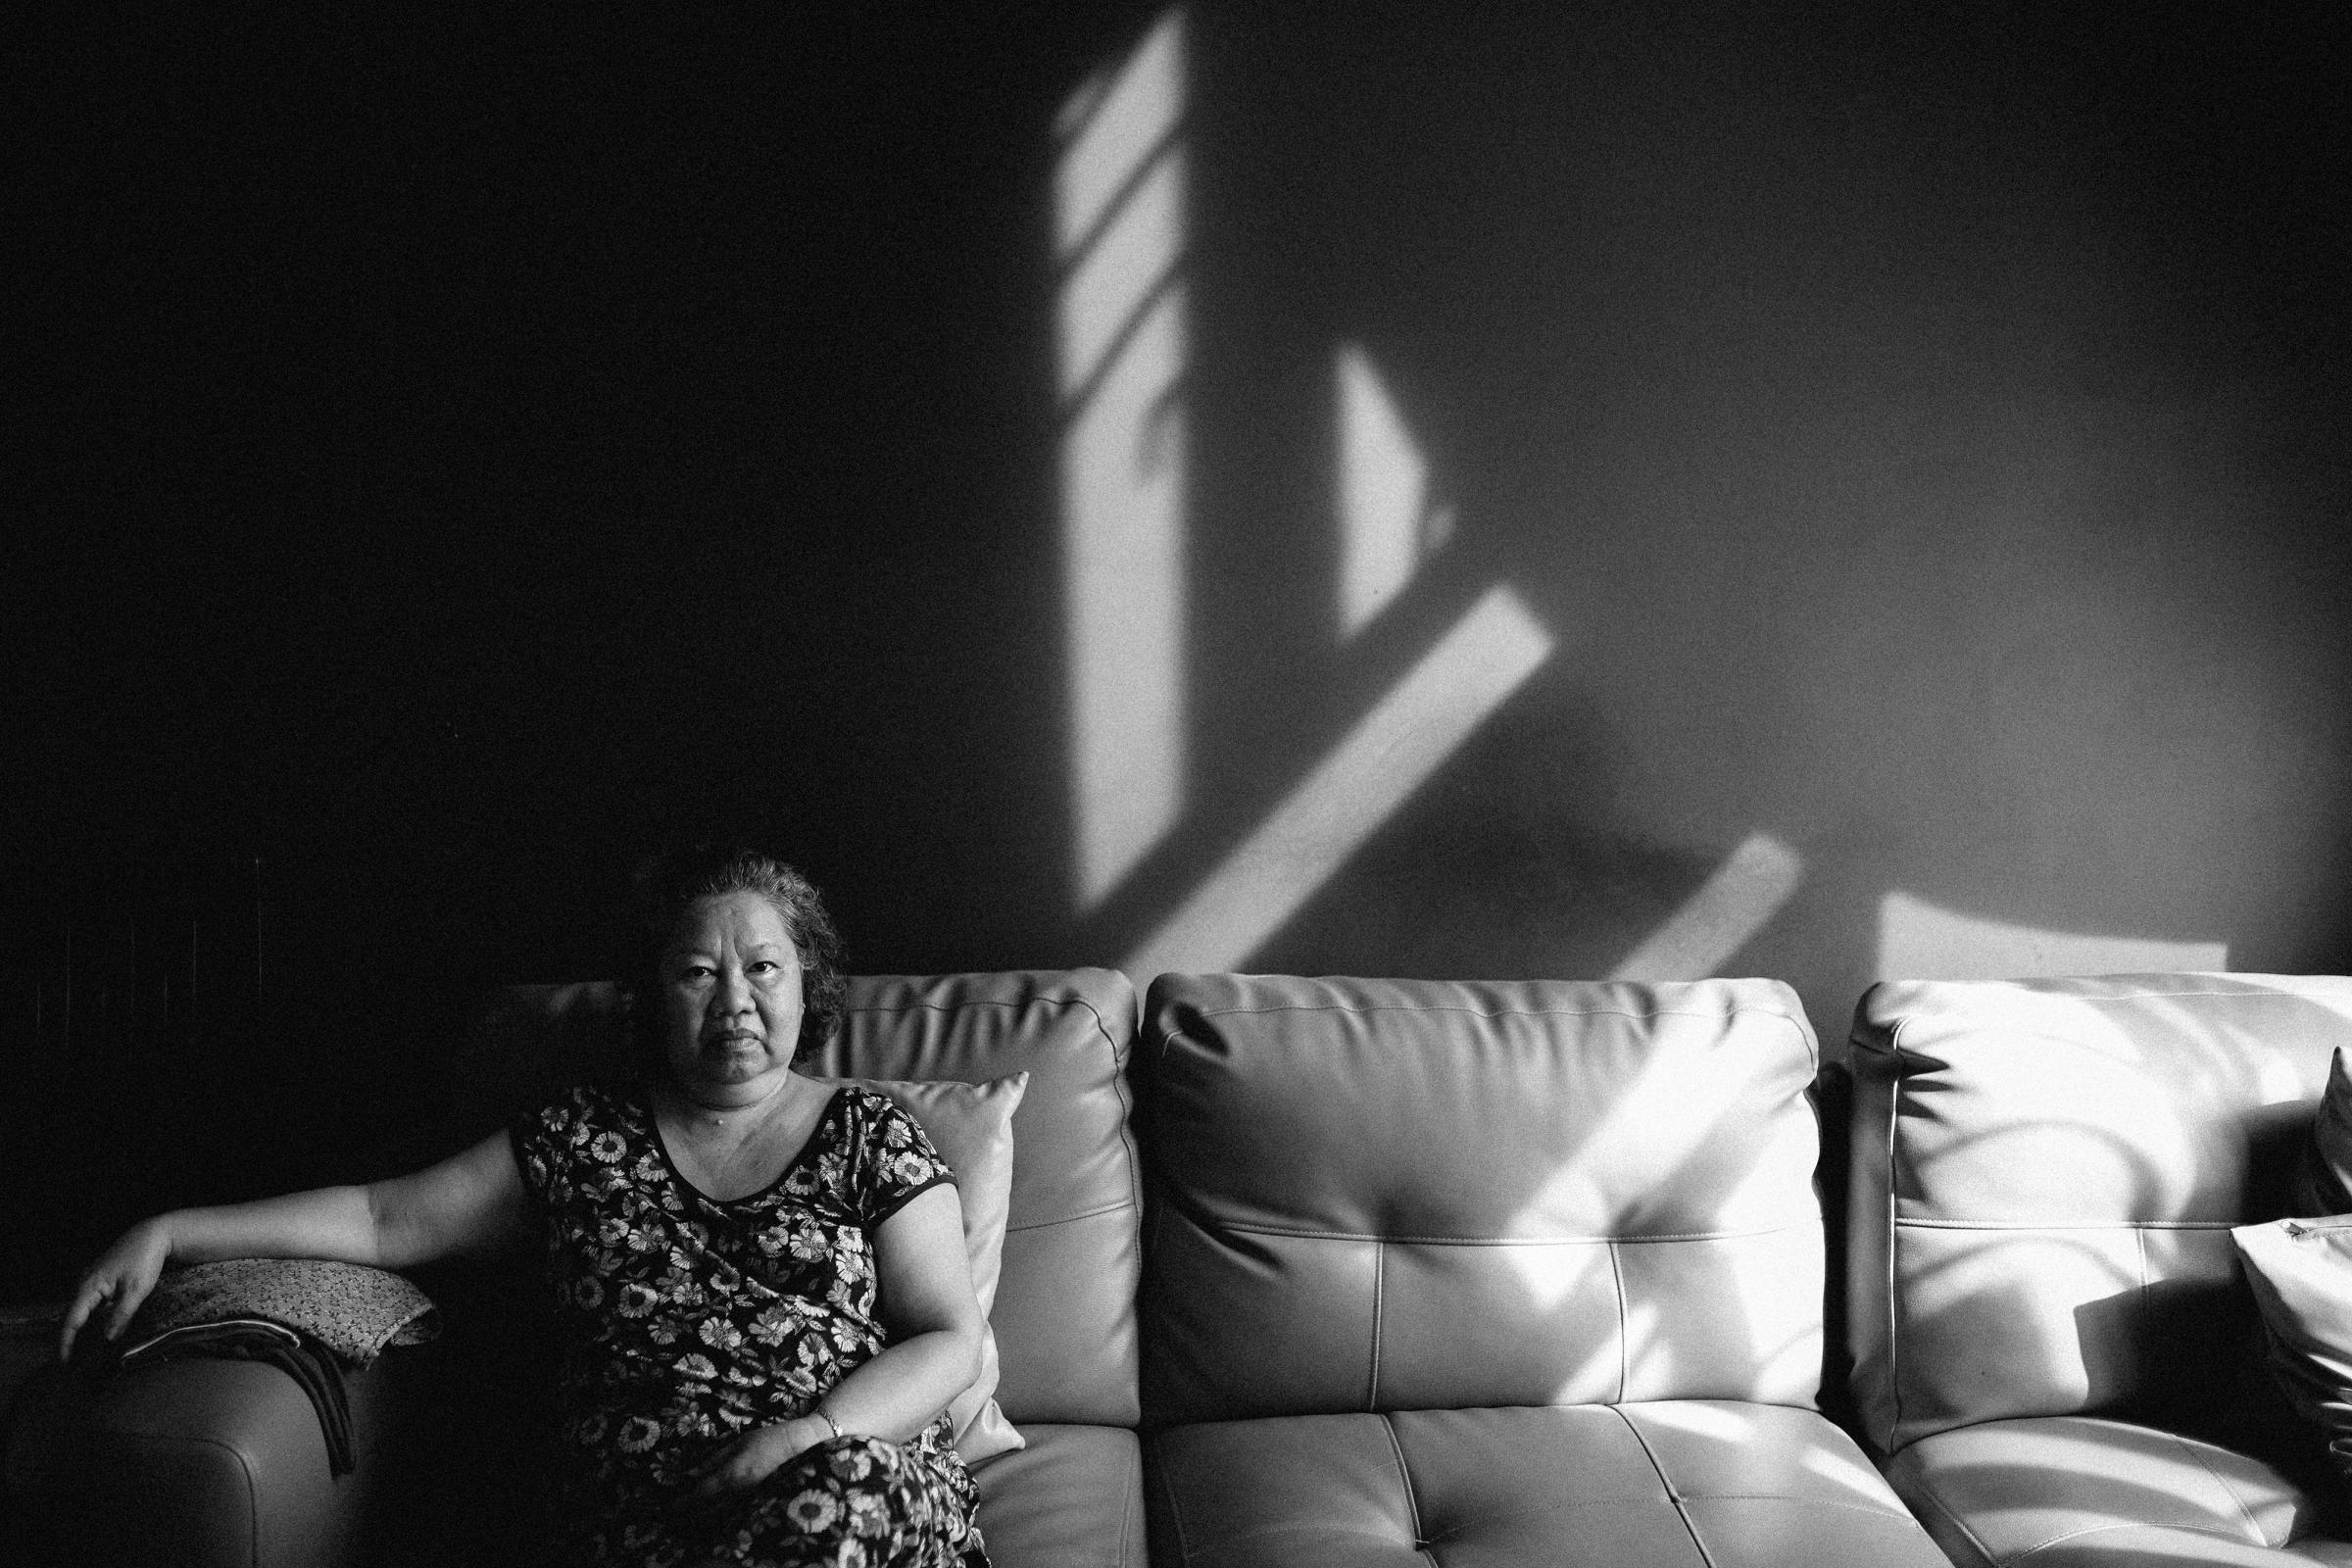 "Mom, don't be scared" - A story of my Mother fighting against depression during Covid lockdown in Vietnam - PORTRAIT OF A STRONG-WILL LADY.  After 3 months of...